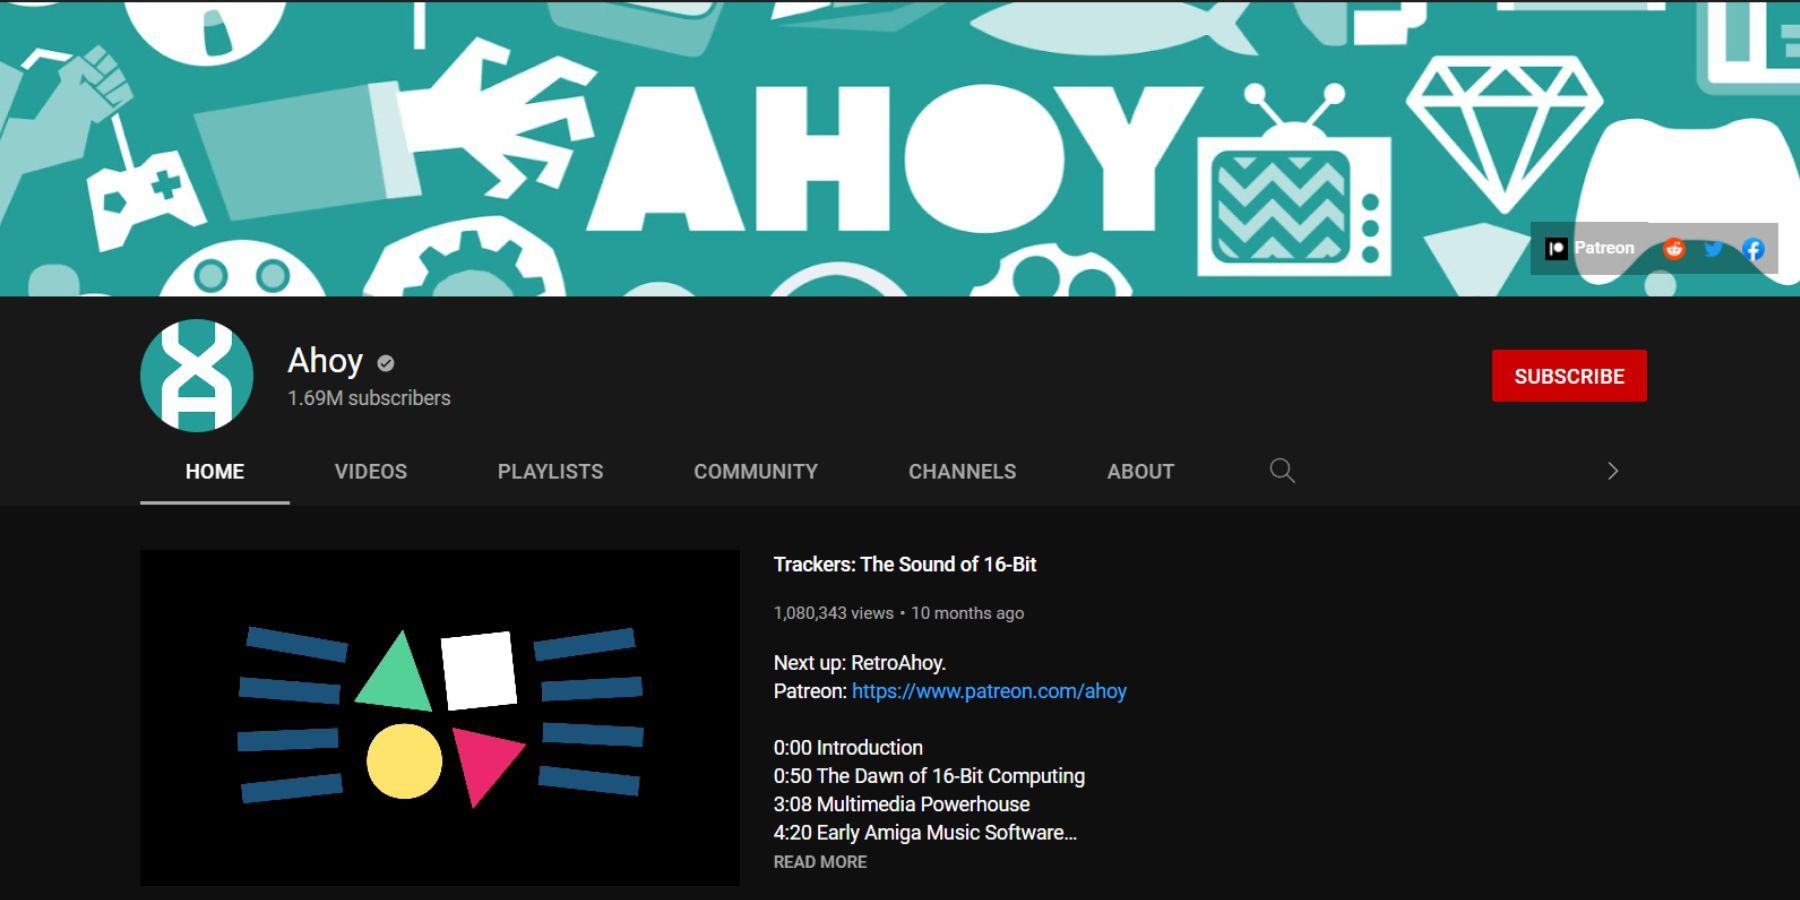 Channel page for Ahoy on YouTube